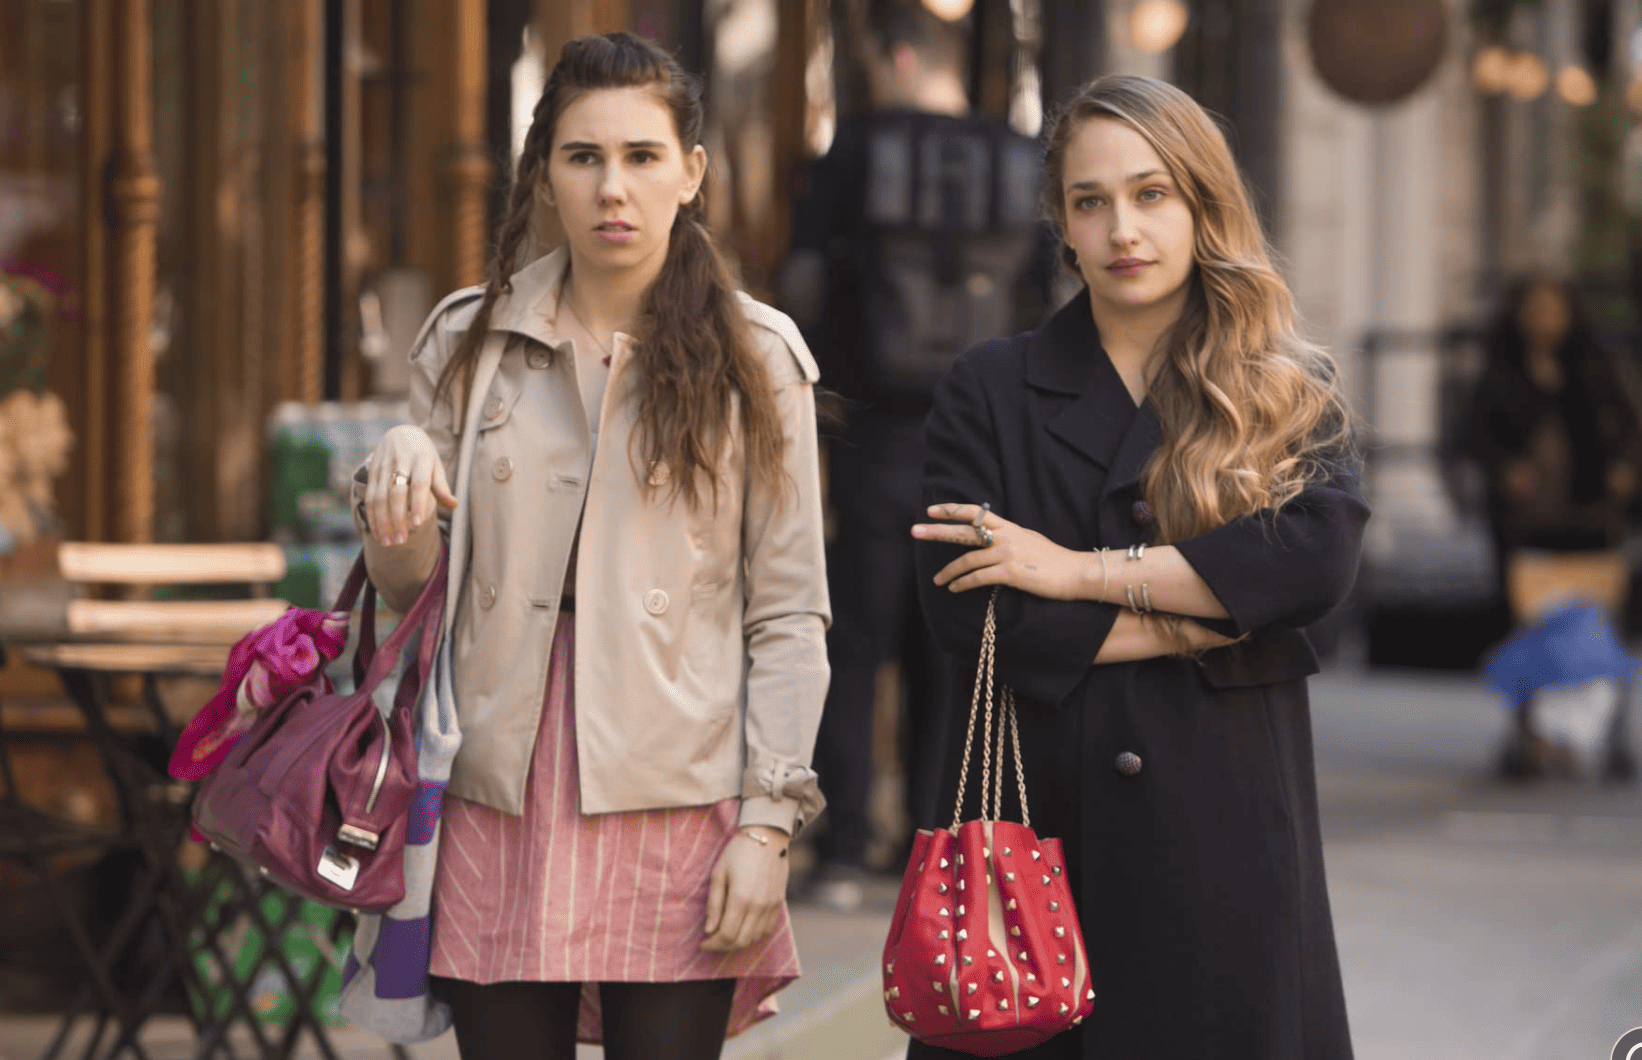 Shosh, with half of her hair in a braid, is standing in the middle of the street, holding a purse with a ribbon and standing next to Jessa in this image from Apatow Productions